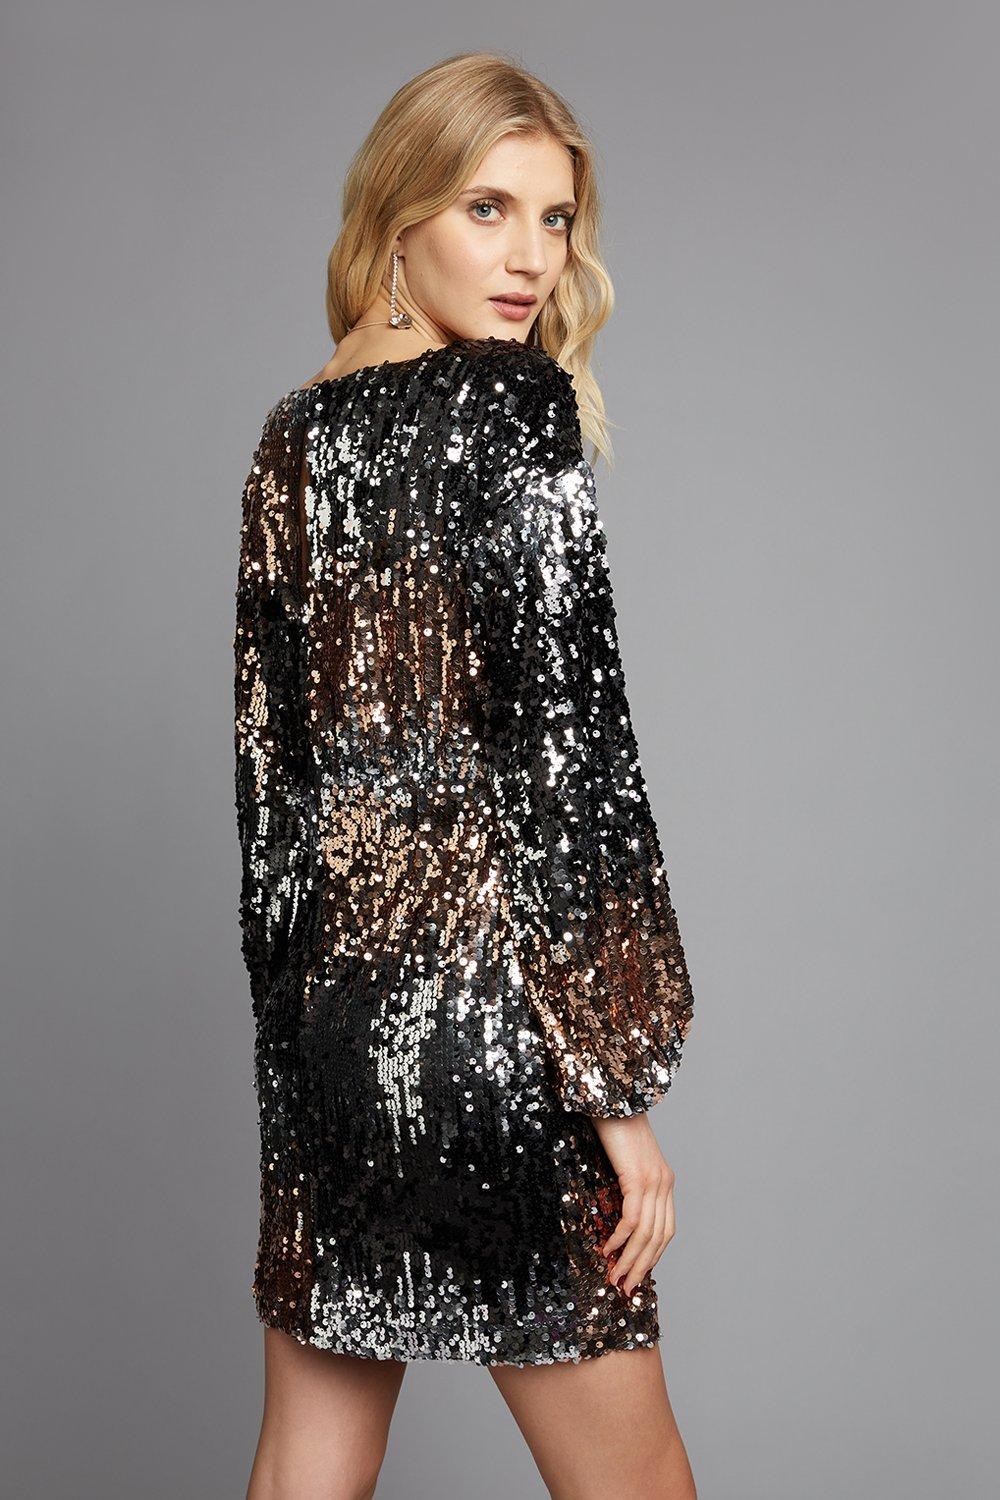 Black and Gold Ombre Sequin Mini Dress ...